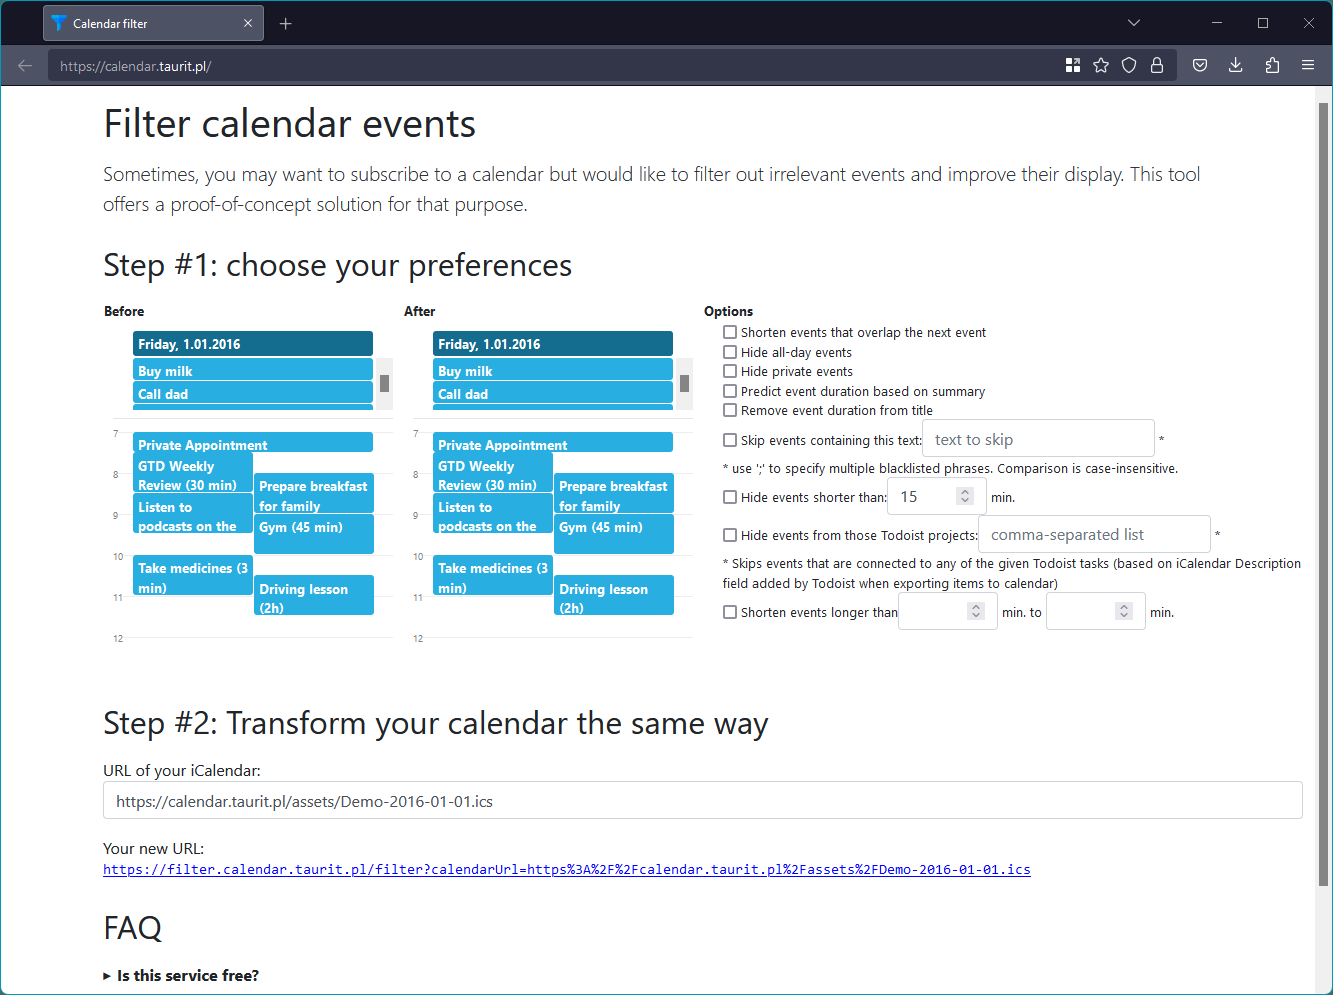 A screenshot of a configuration page available at https://calendar.taurit.pl. This page allows you to personalize your filter.